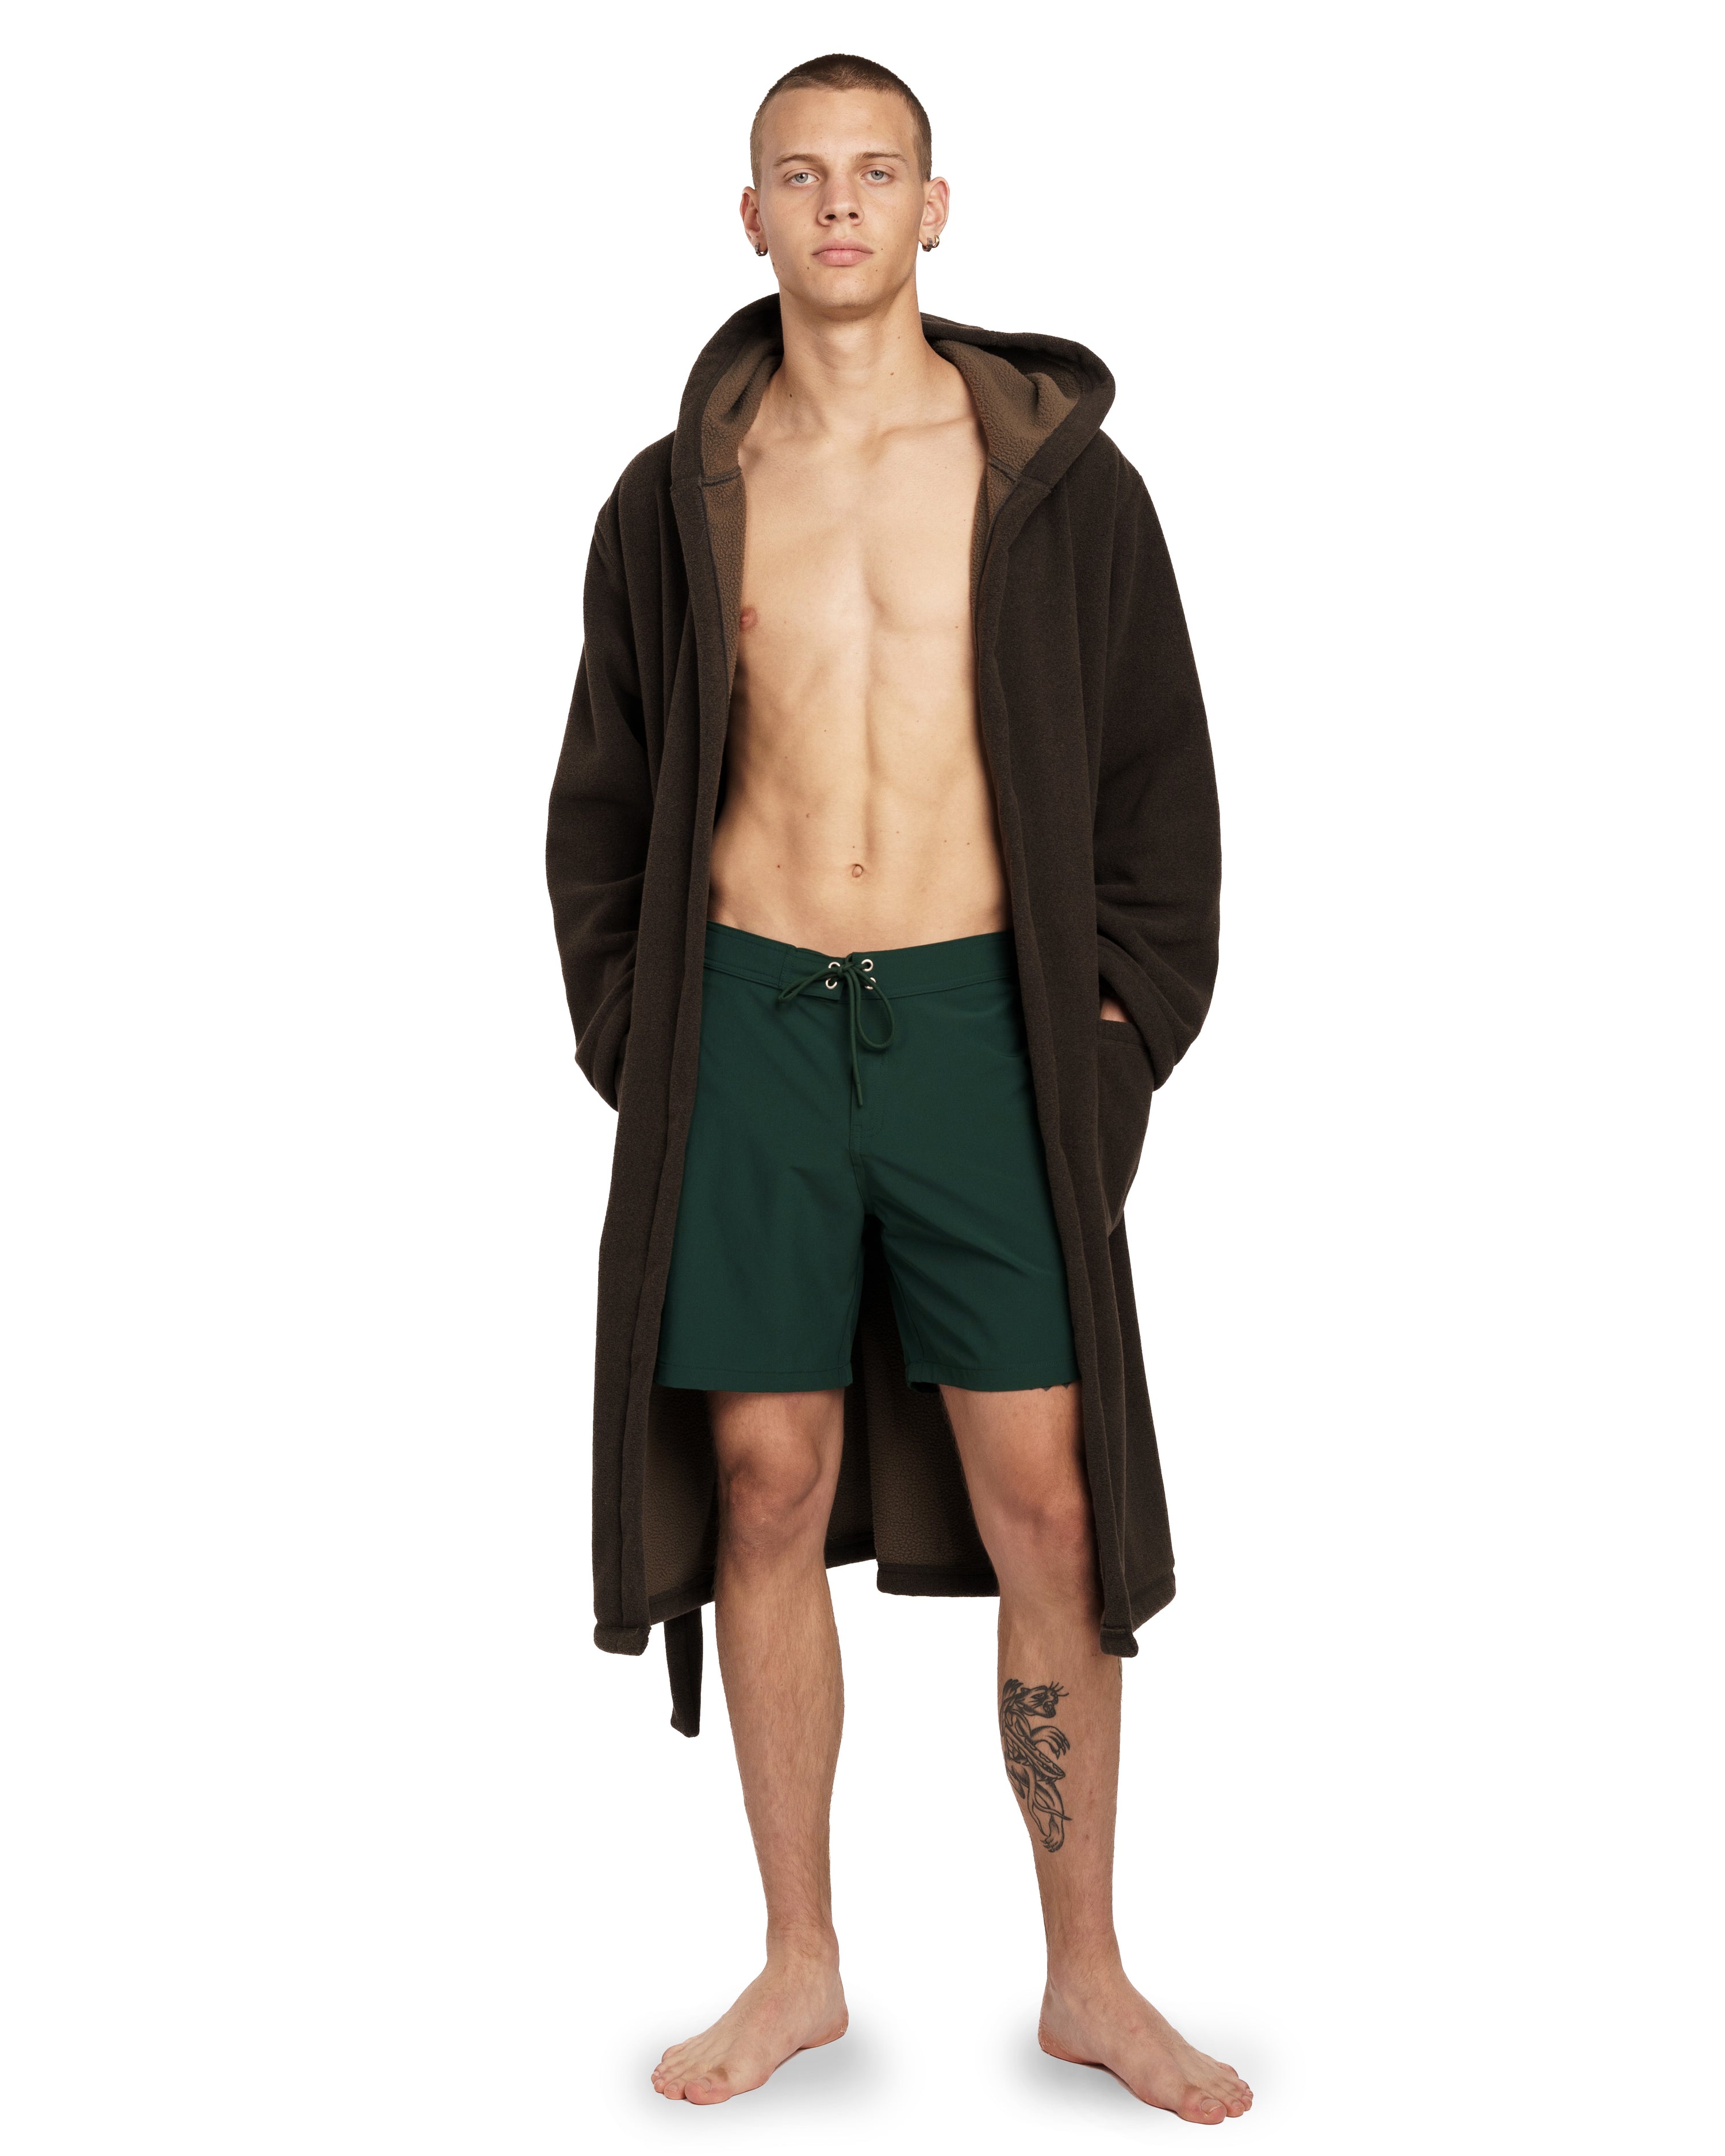 pine green Bather technical surf trunk on model